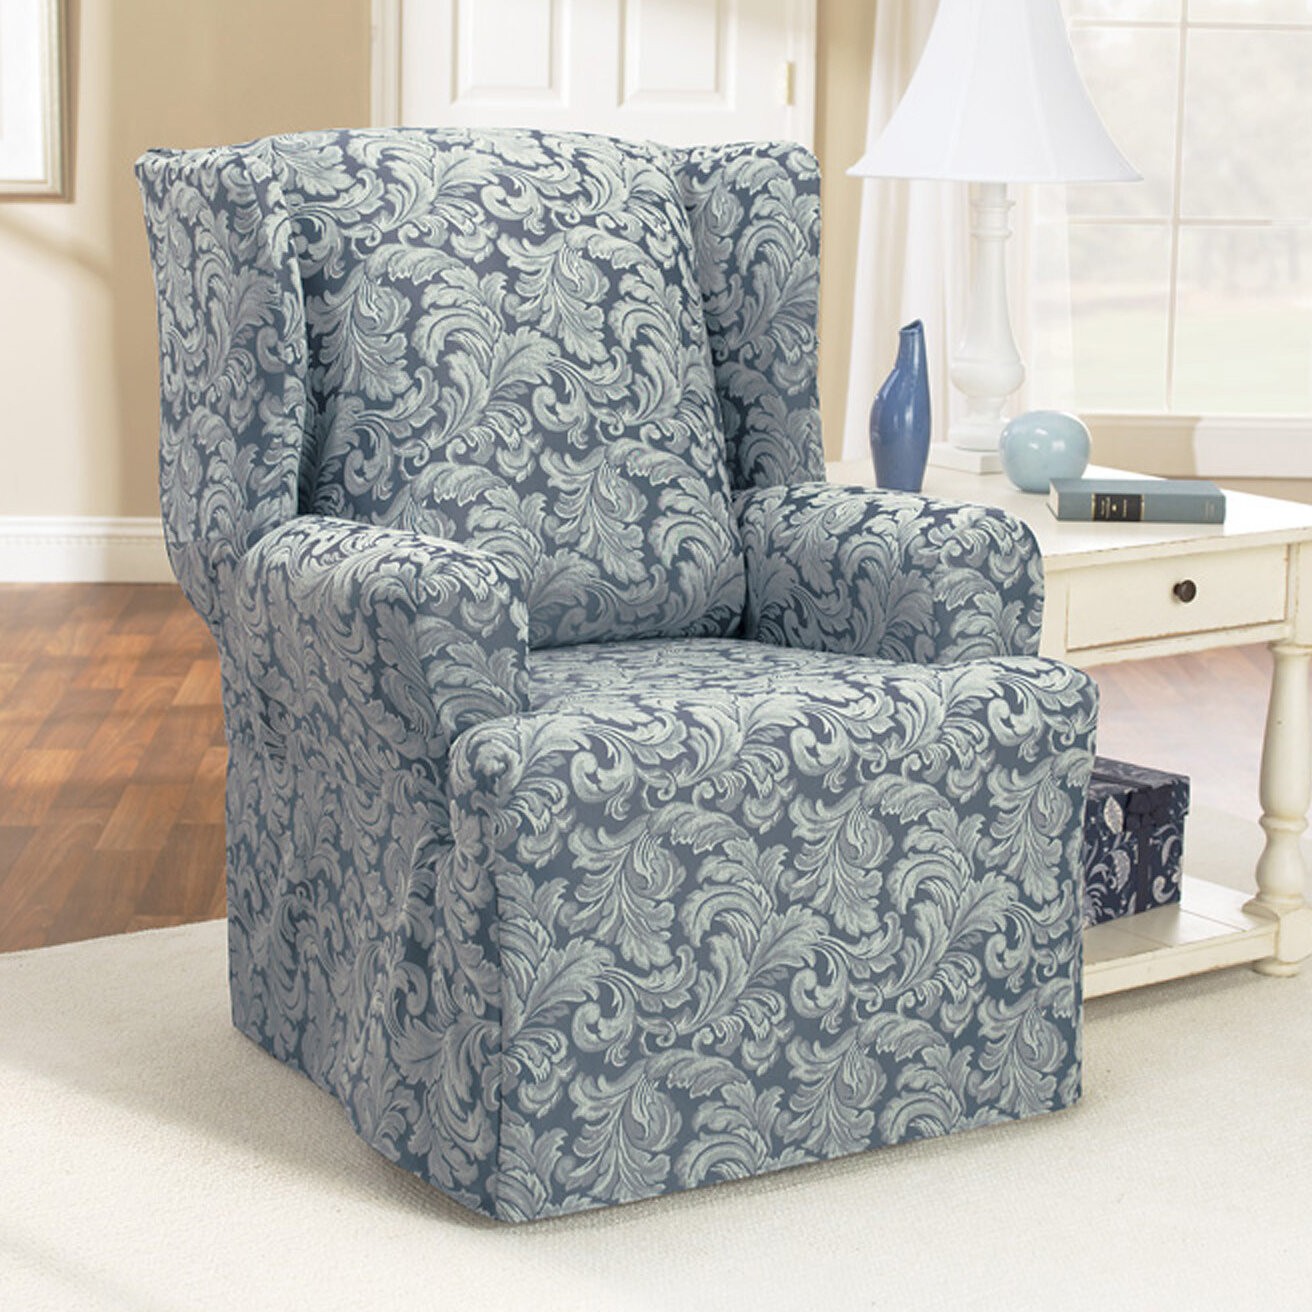 Scroll Classic Wing Chair T Cushion Skirted Slipcover